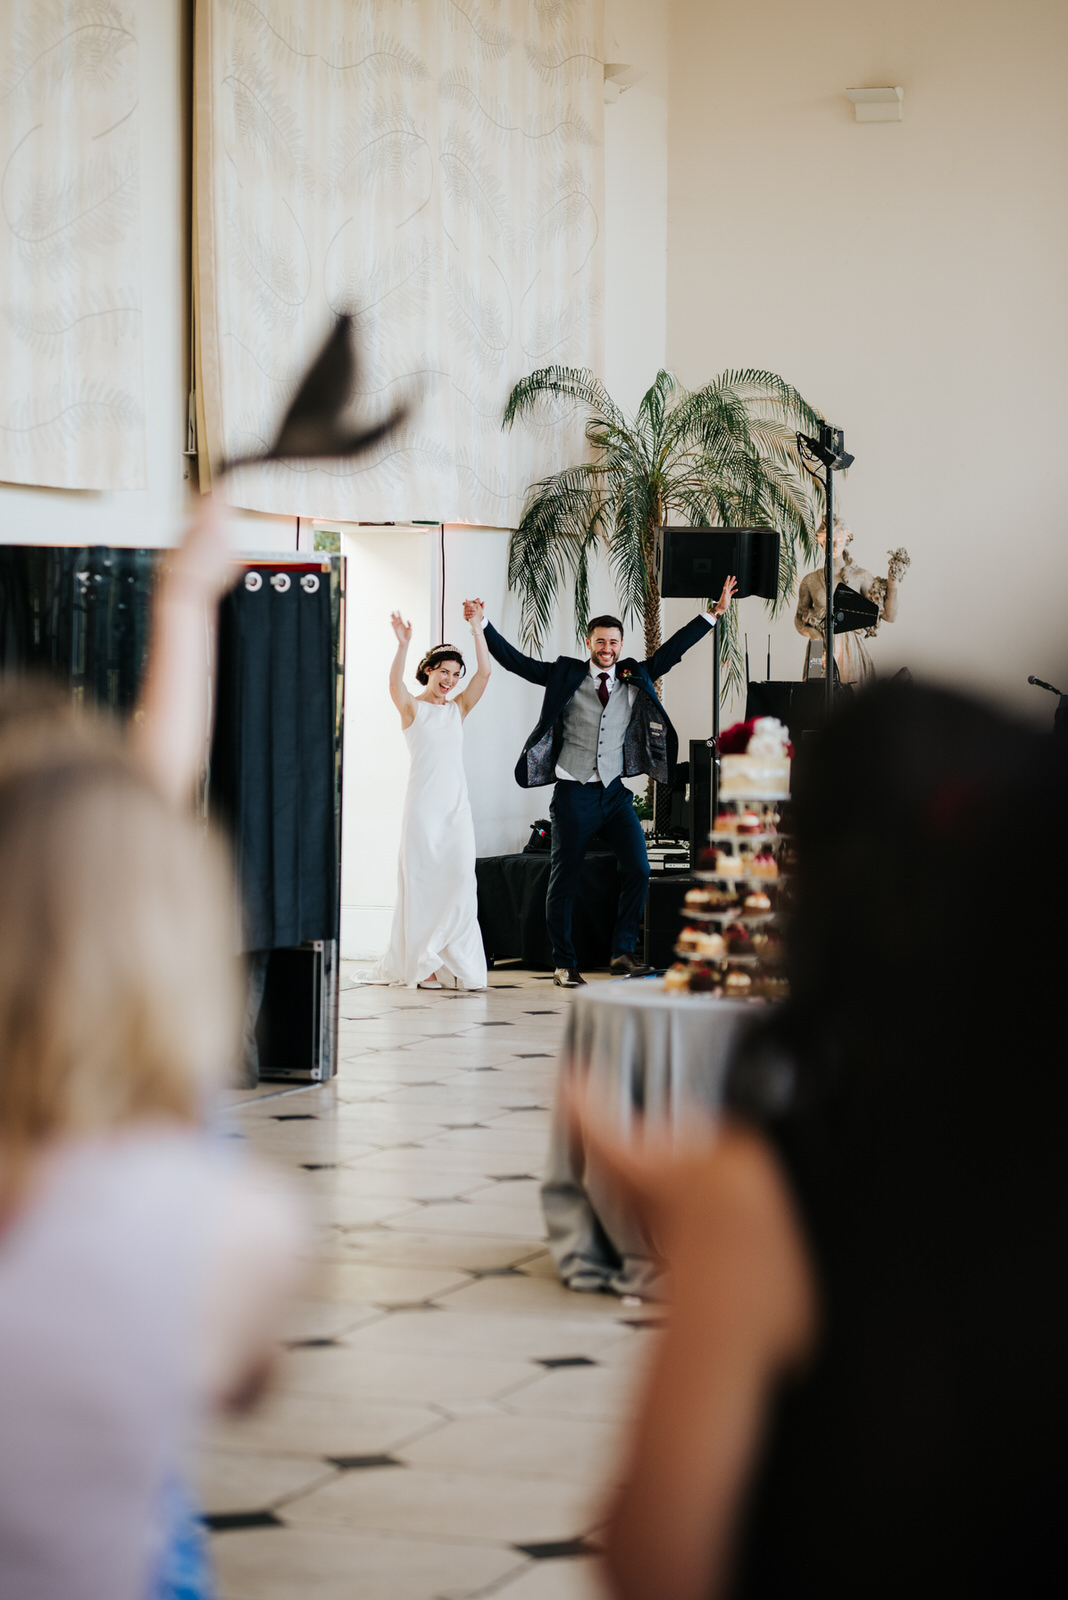  Bride and groom make their epic entrance with hands in the air at the orangery at kew gardens as guests clap and wave napkins 